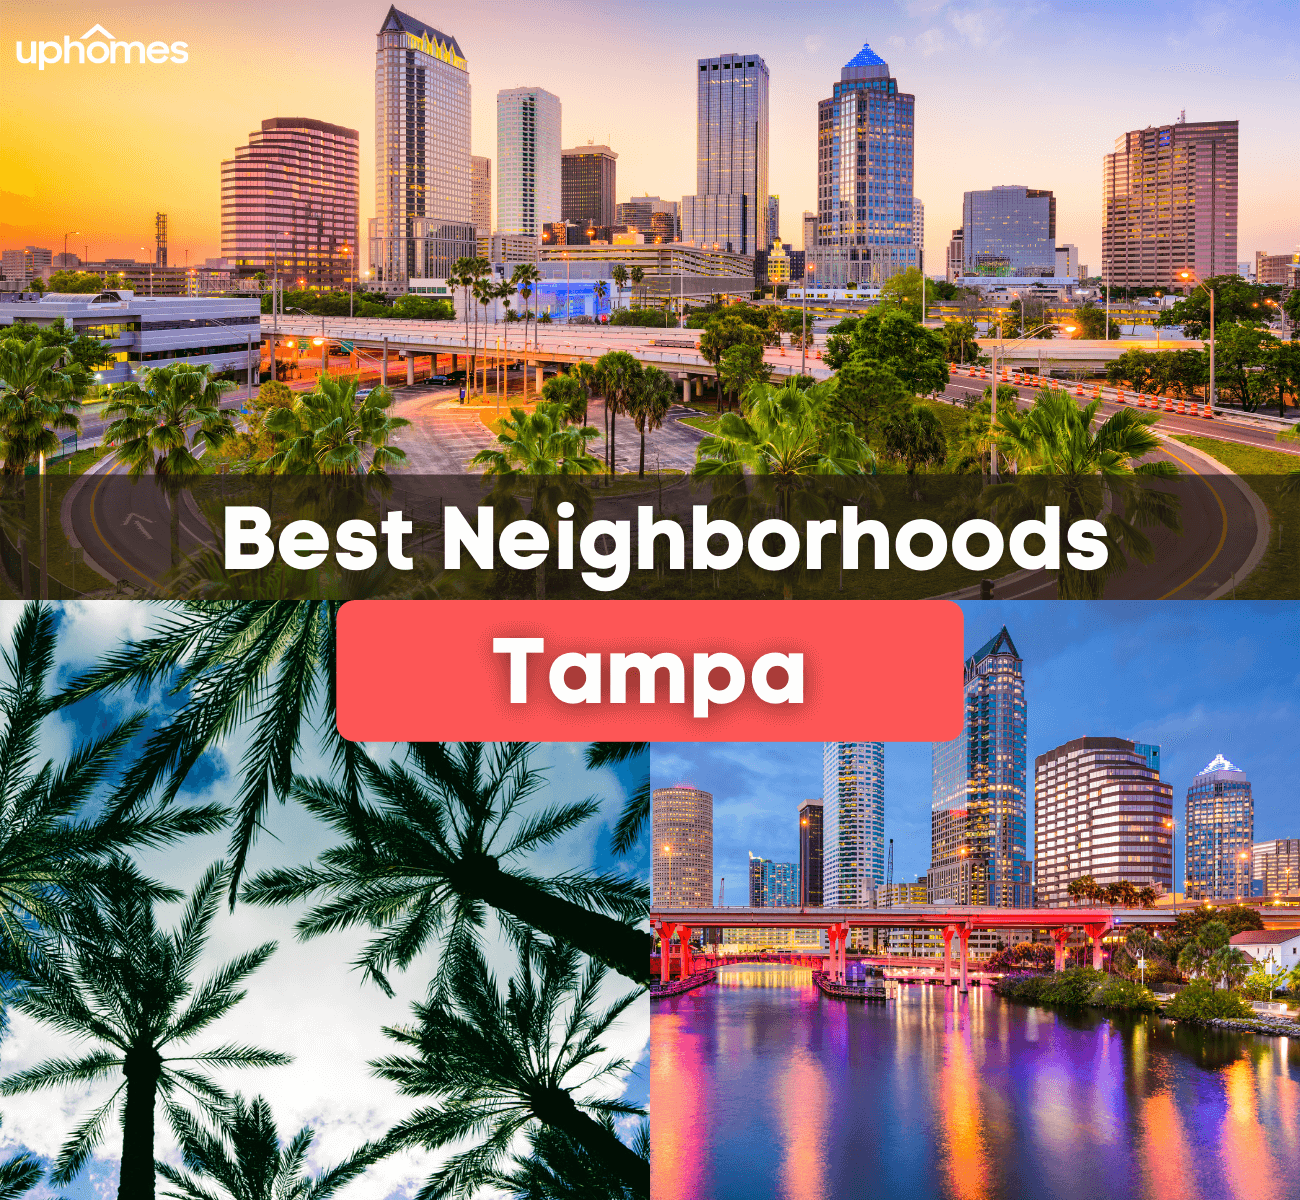 Best Neighborhoods Tampa - What are the best places to live in Tampa?